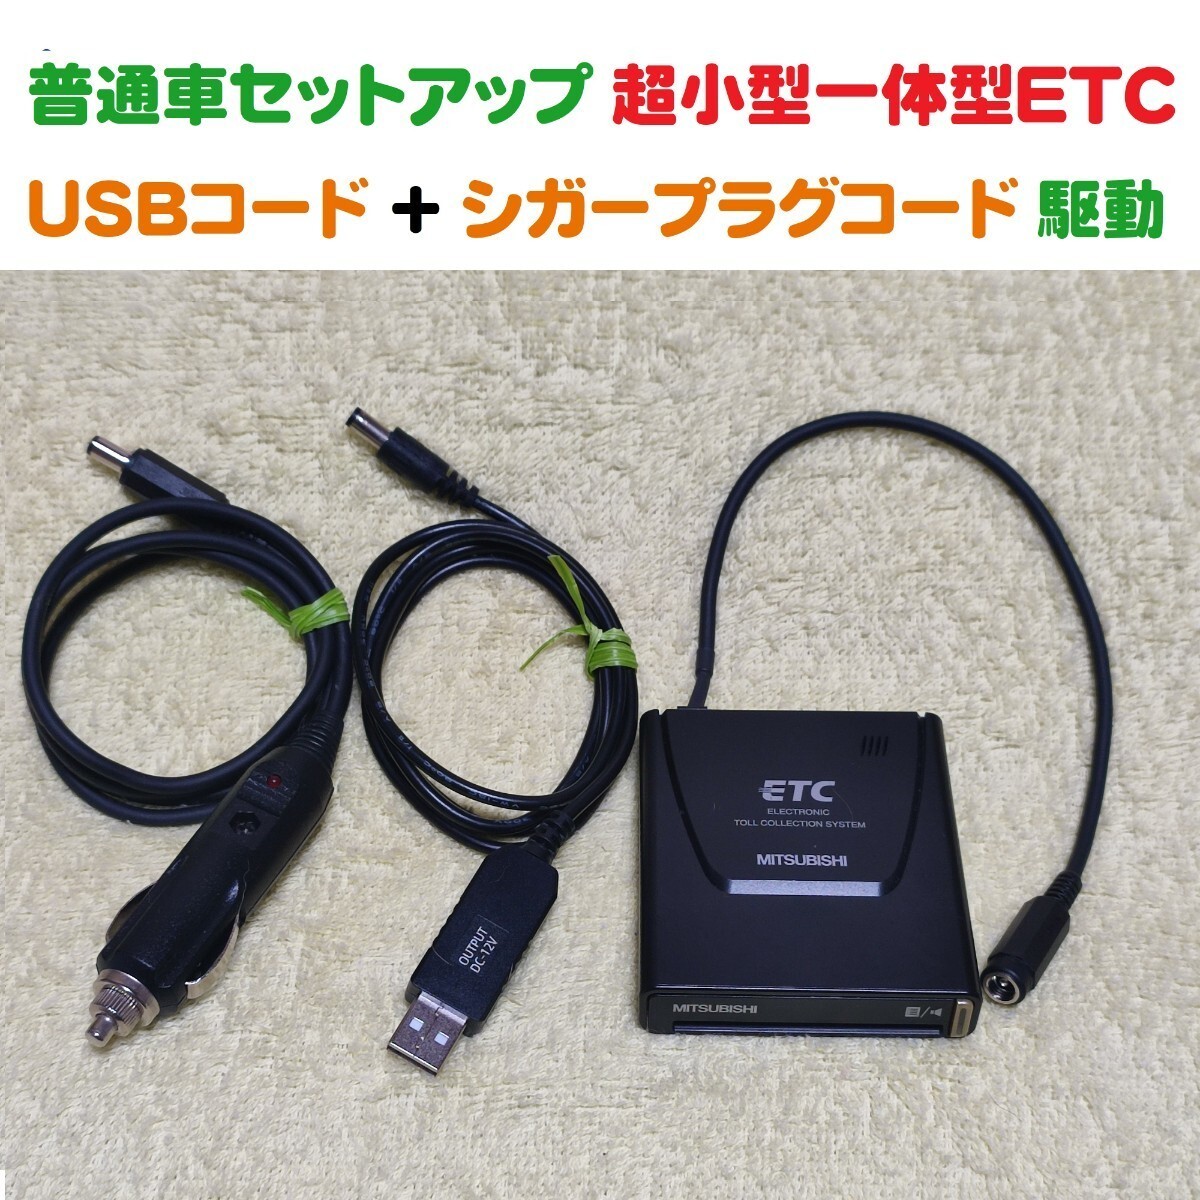  normal automobile setup microminiature one body ETC in-vehicle device Mitsubishi EP-9U5*V( simple . breakdown . little ) USB pressure code + cigar plug cord two power supply 